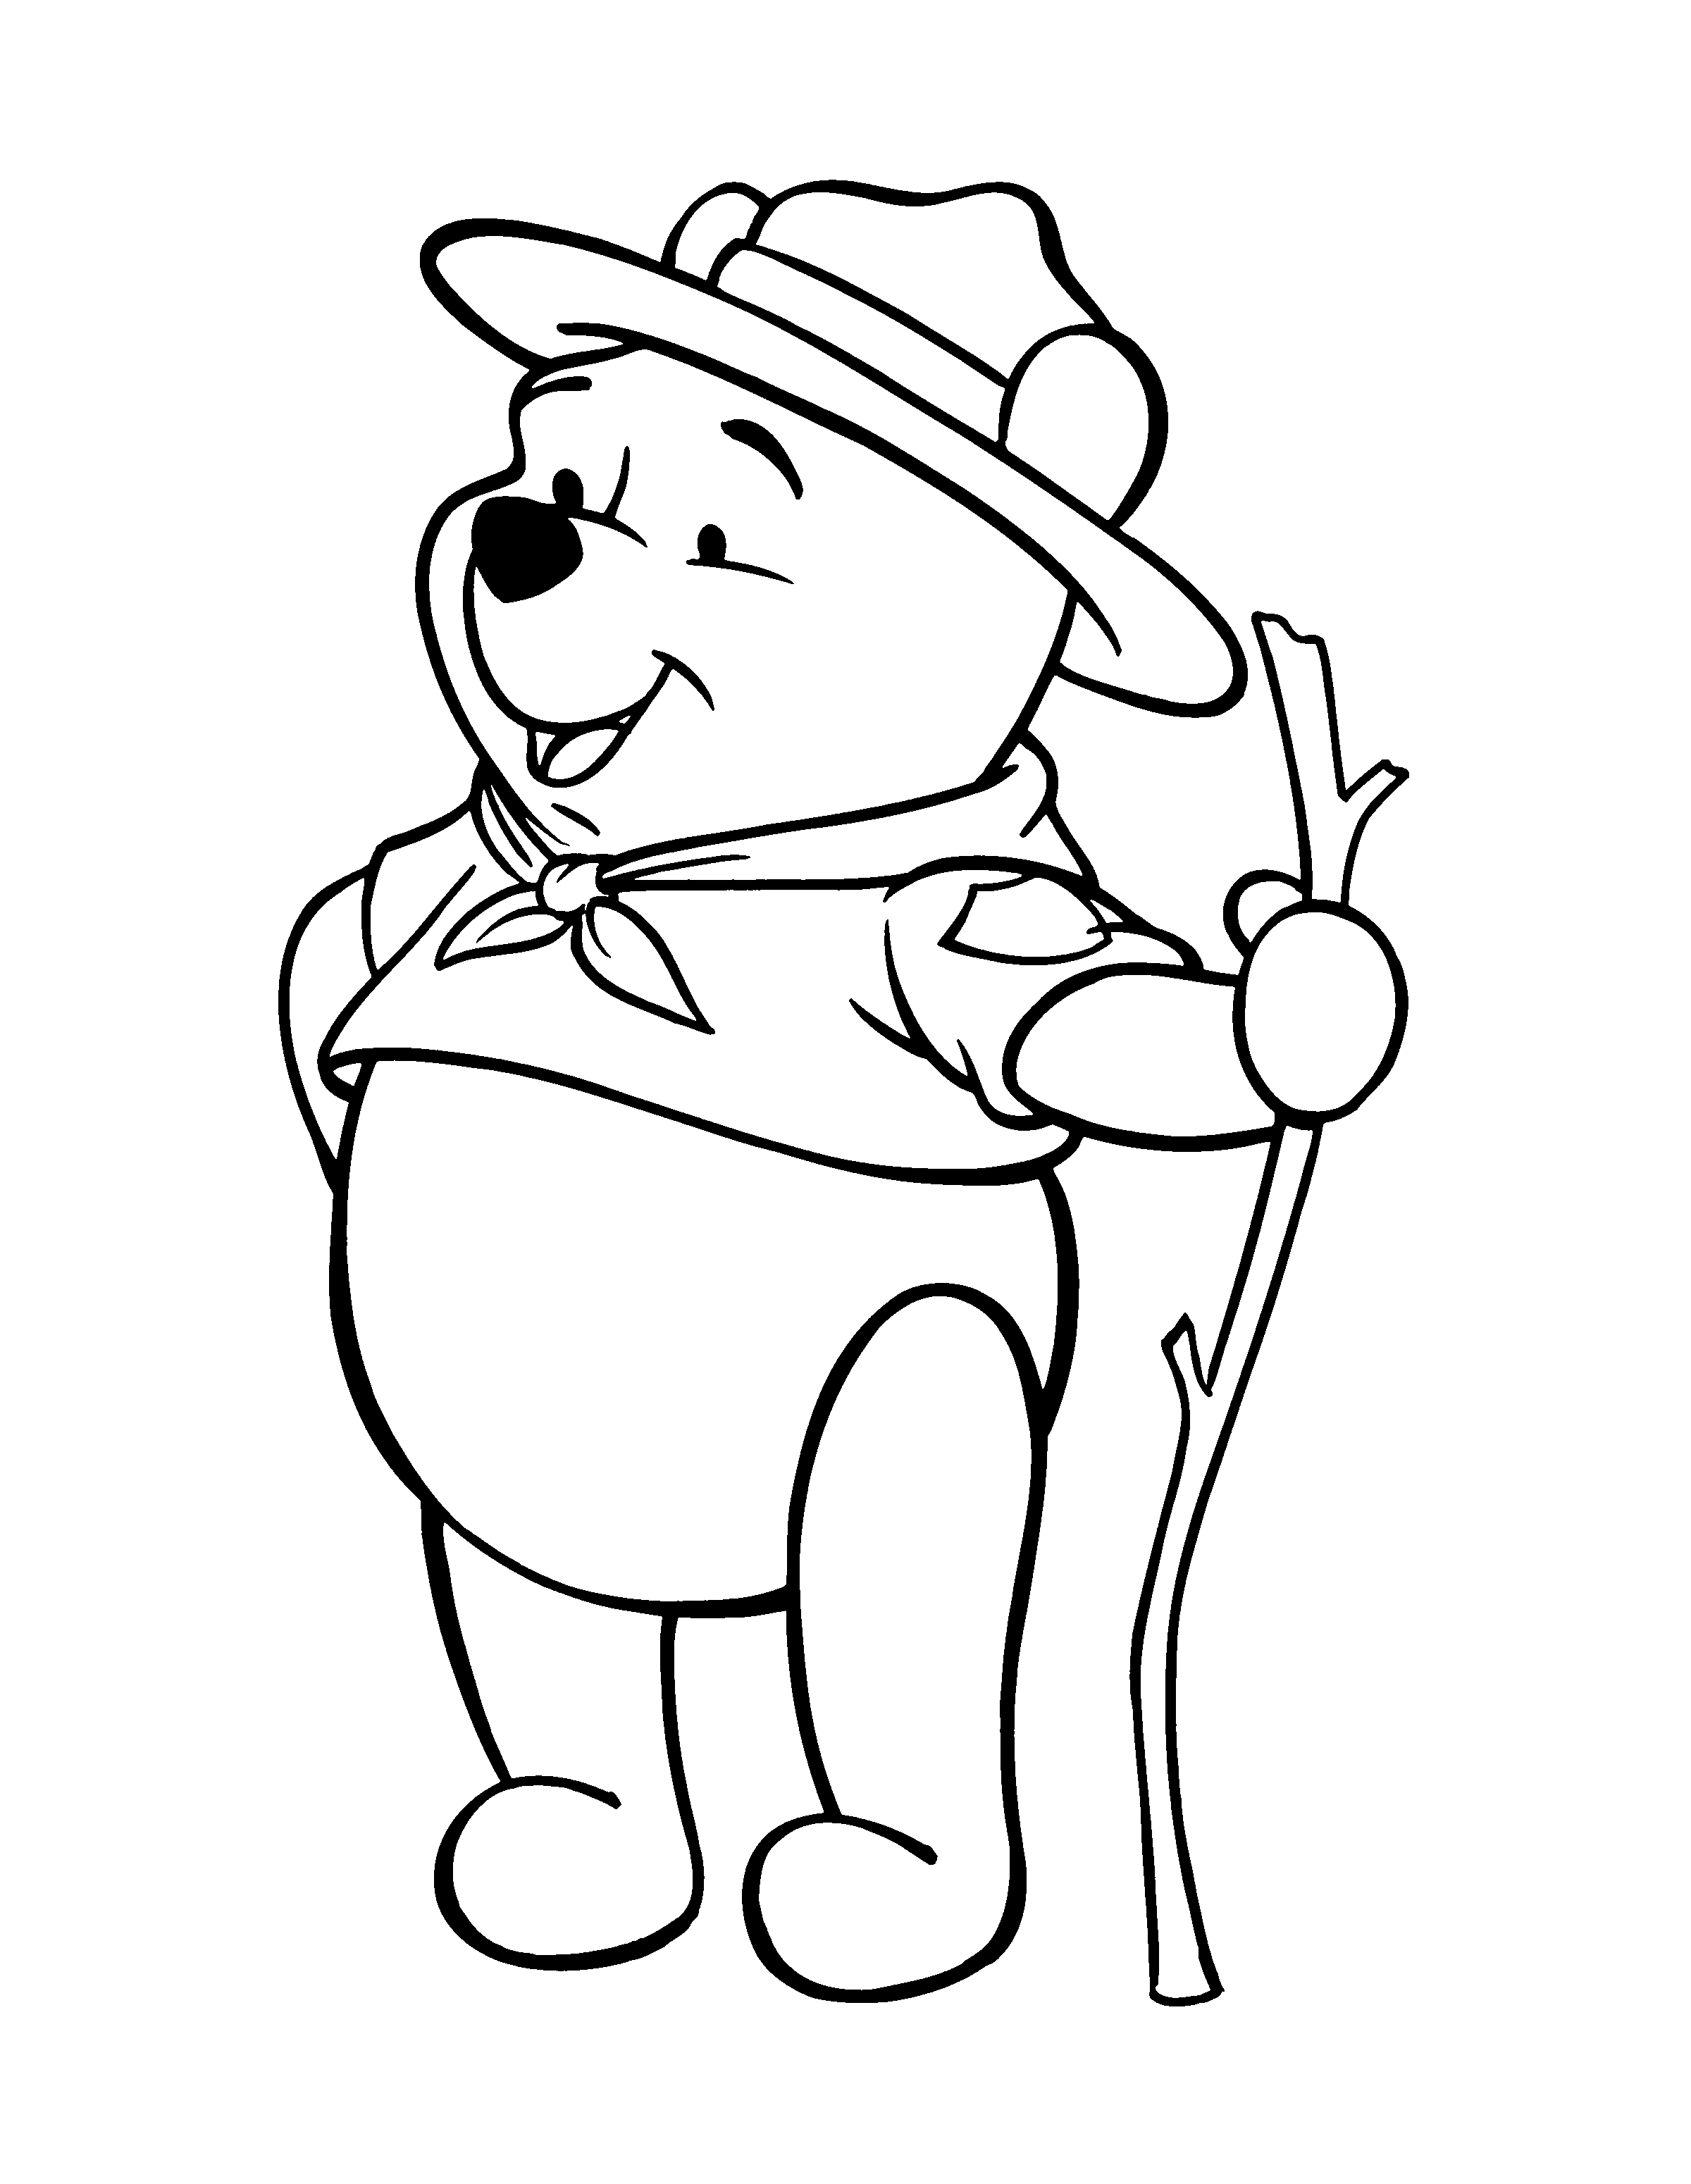 winnie pooh colouring pages a tale of a honey freak bear winnie the pooh 20 winnie the colouring pages pooh winnie 